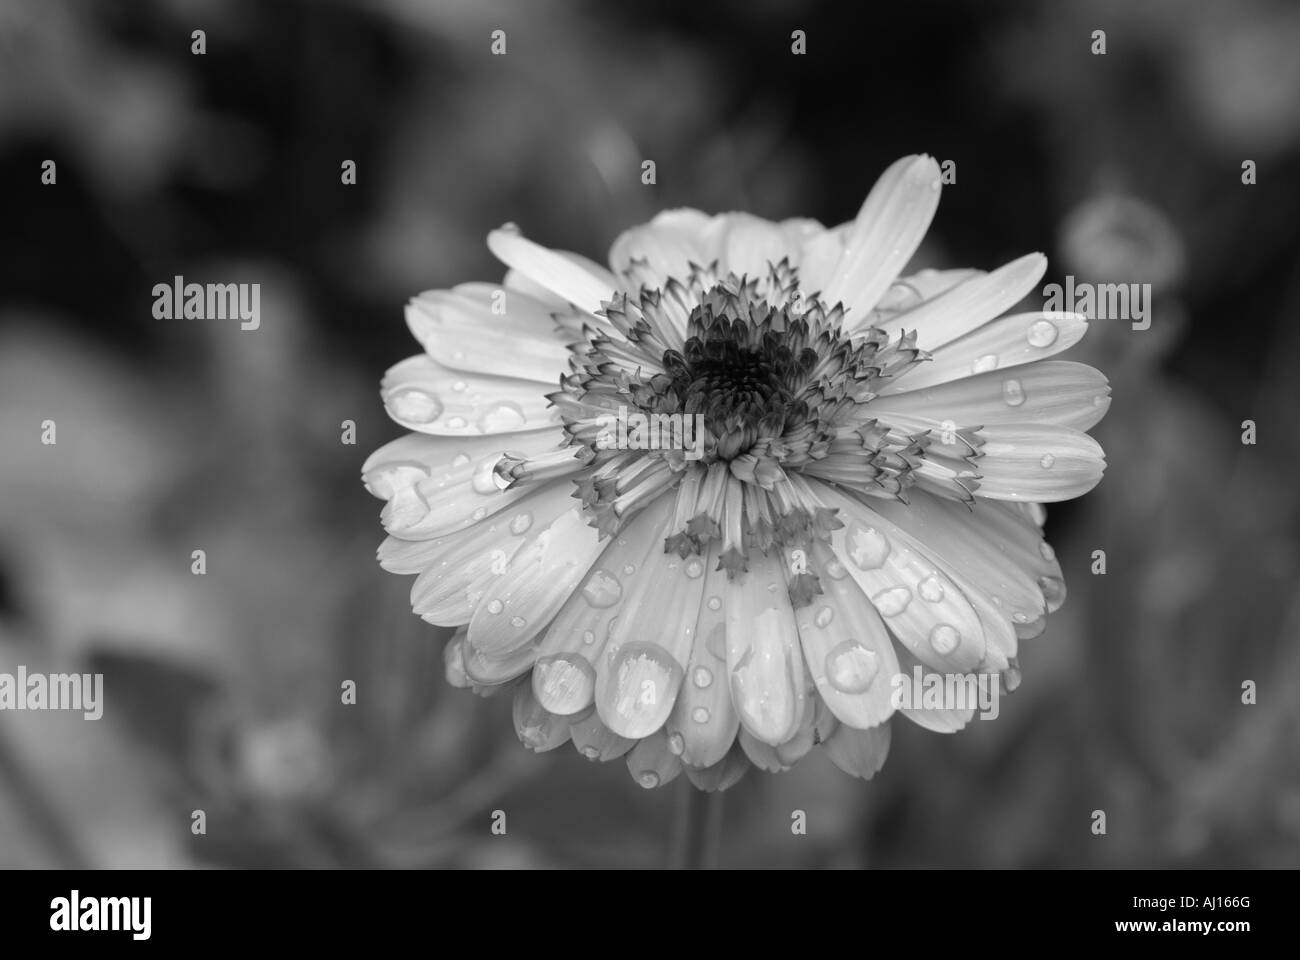 marigold black and white with raindrops on petals Stock Photo